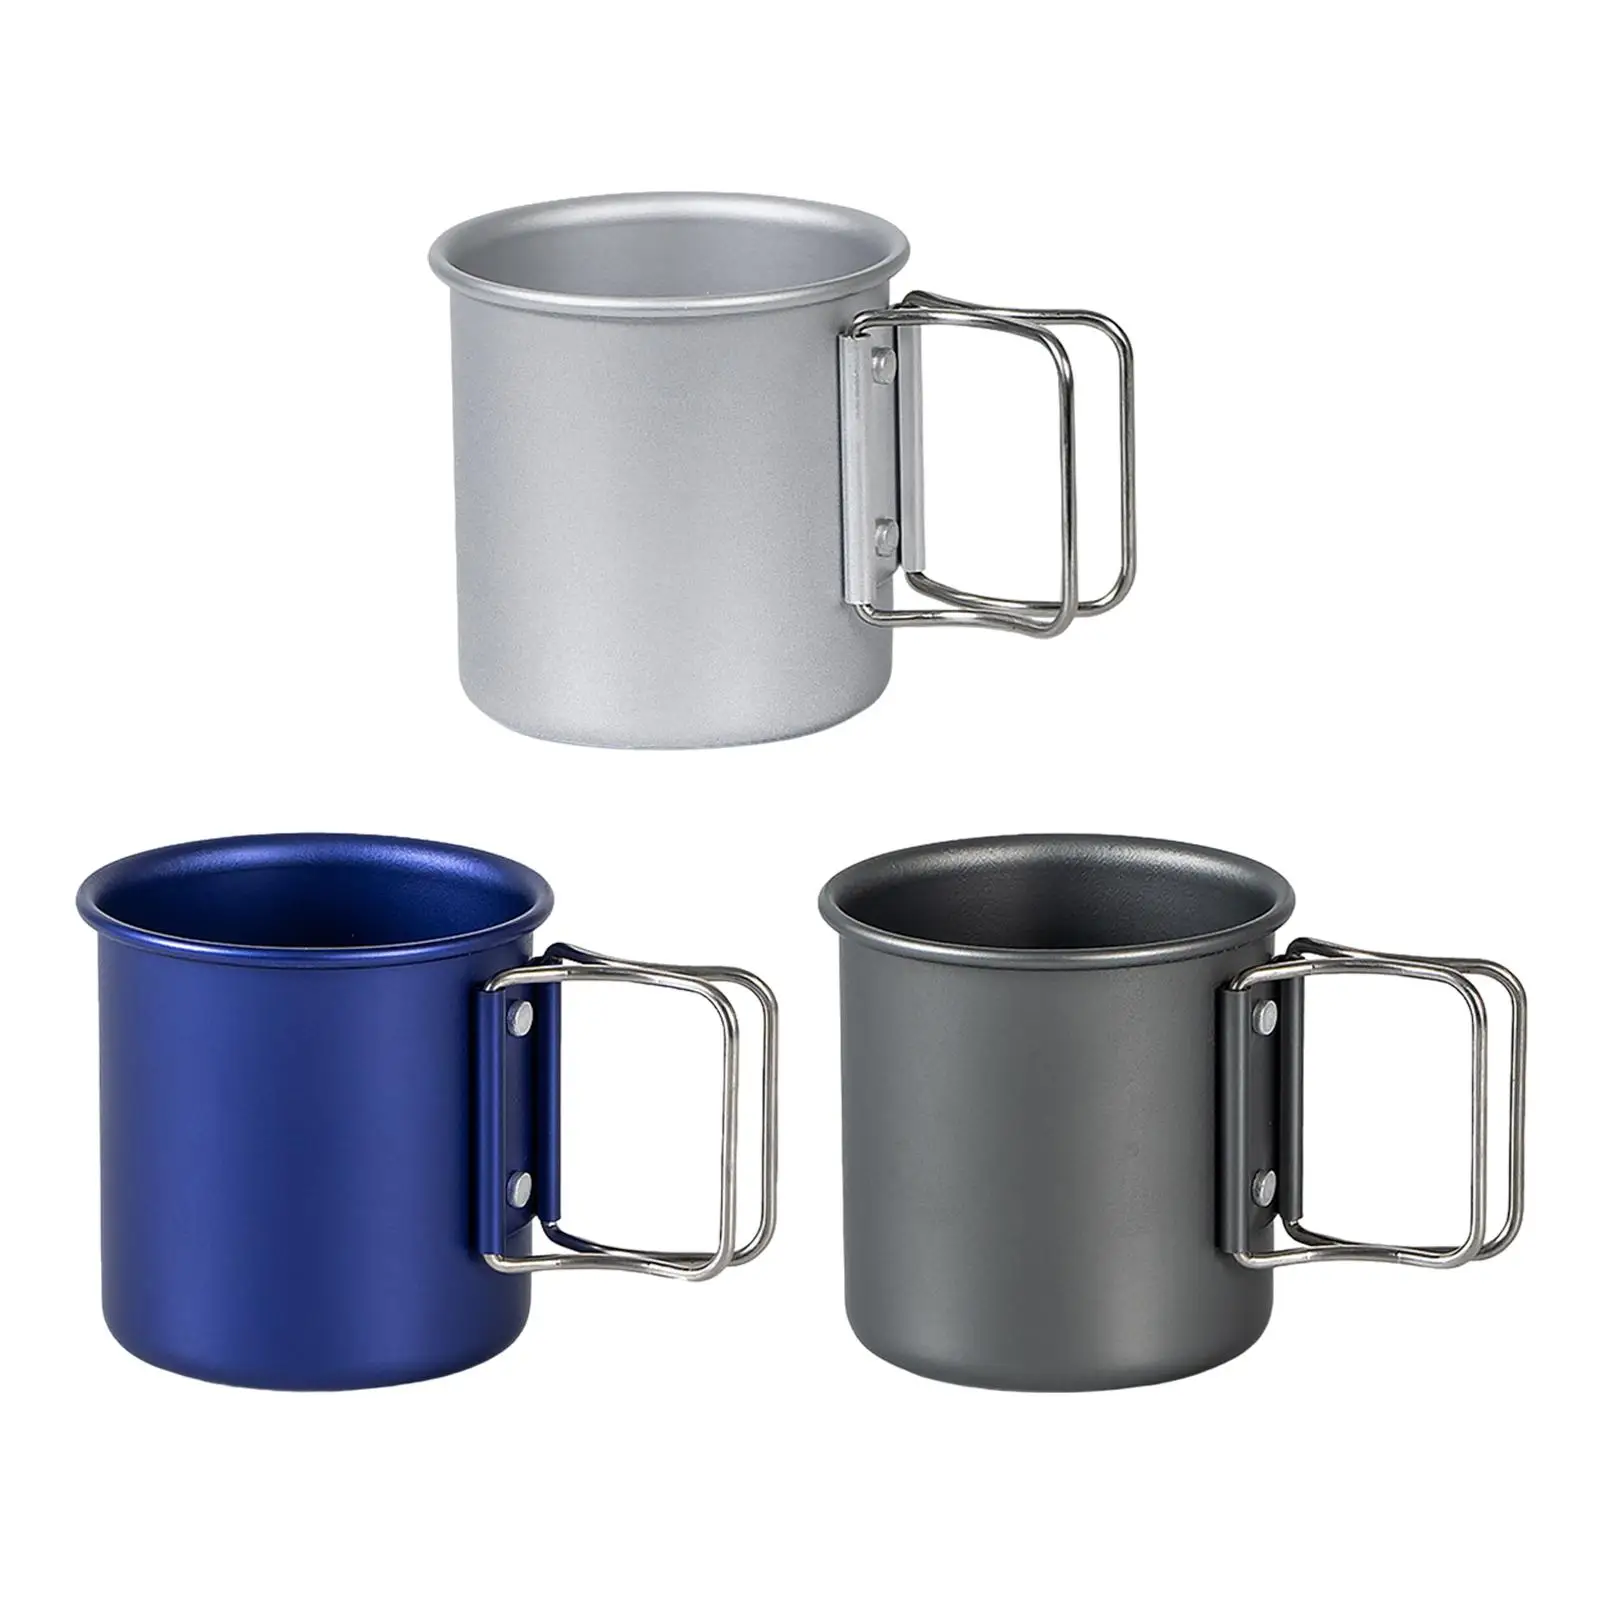 Camping mug cup tableware with foldable handles portable water cup beer mug for